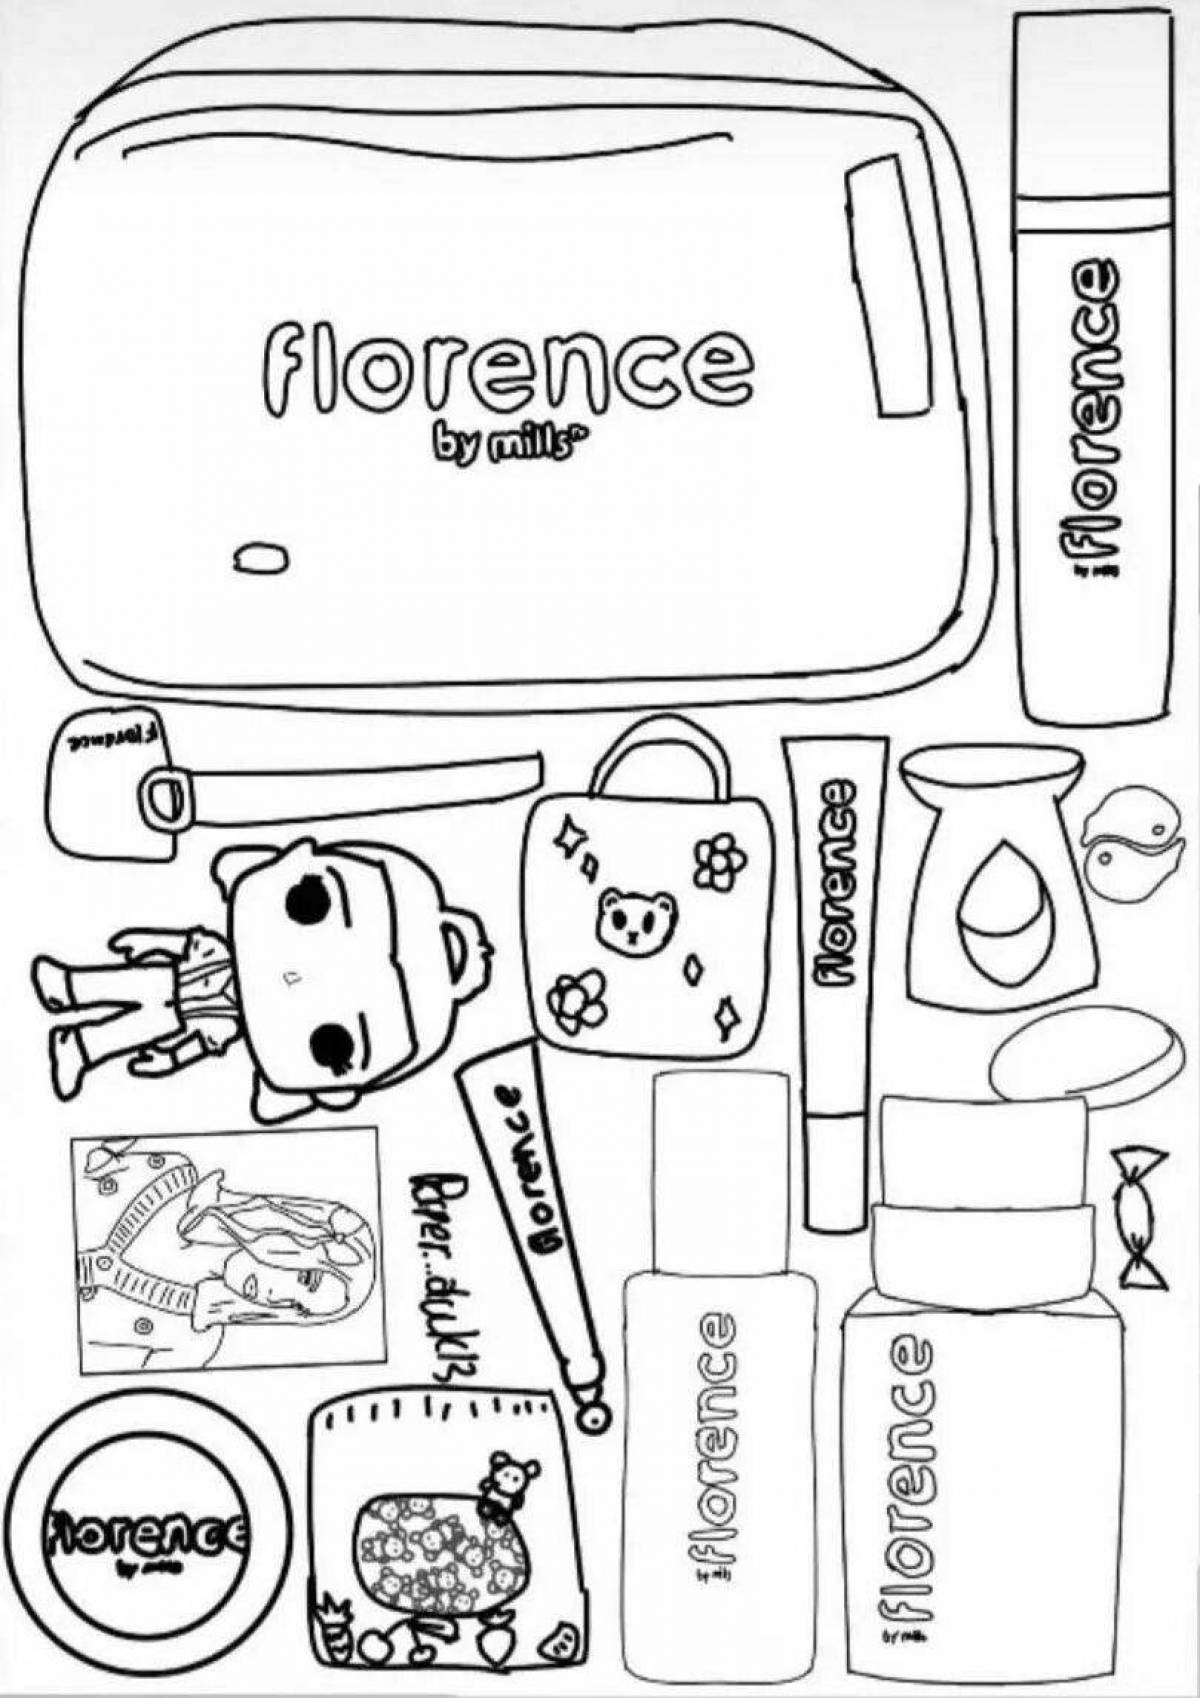 Amazing coloring page for clothes for ooty lalafanfan